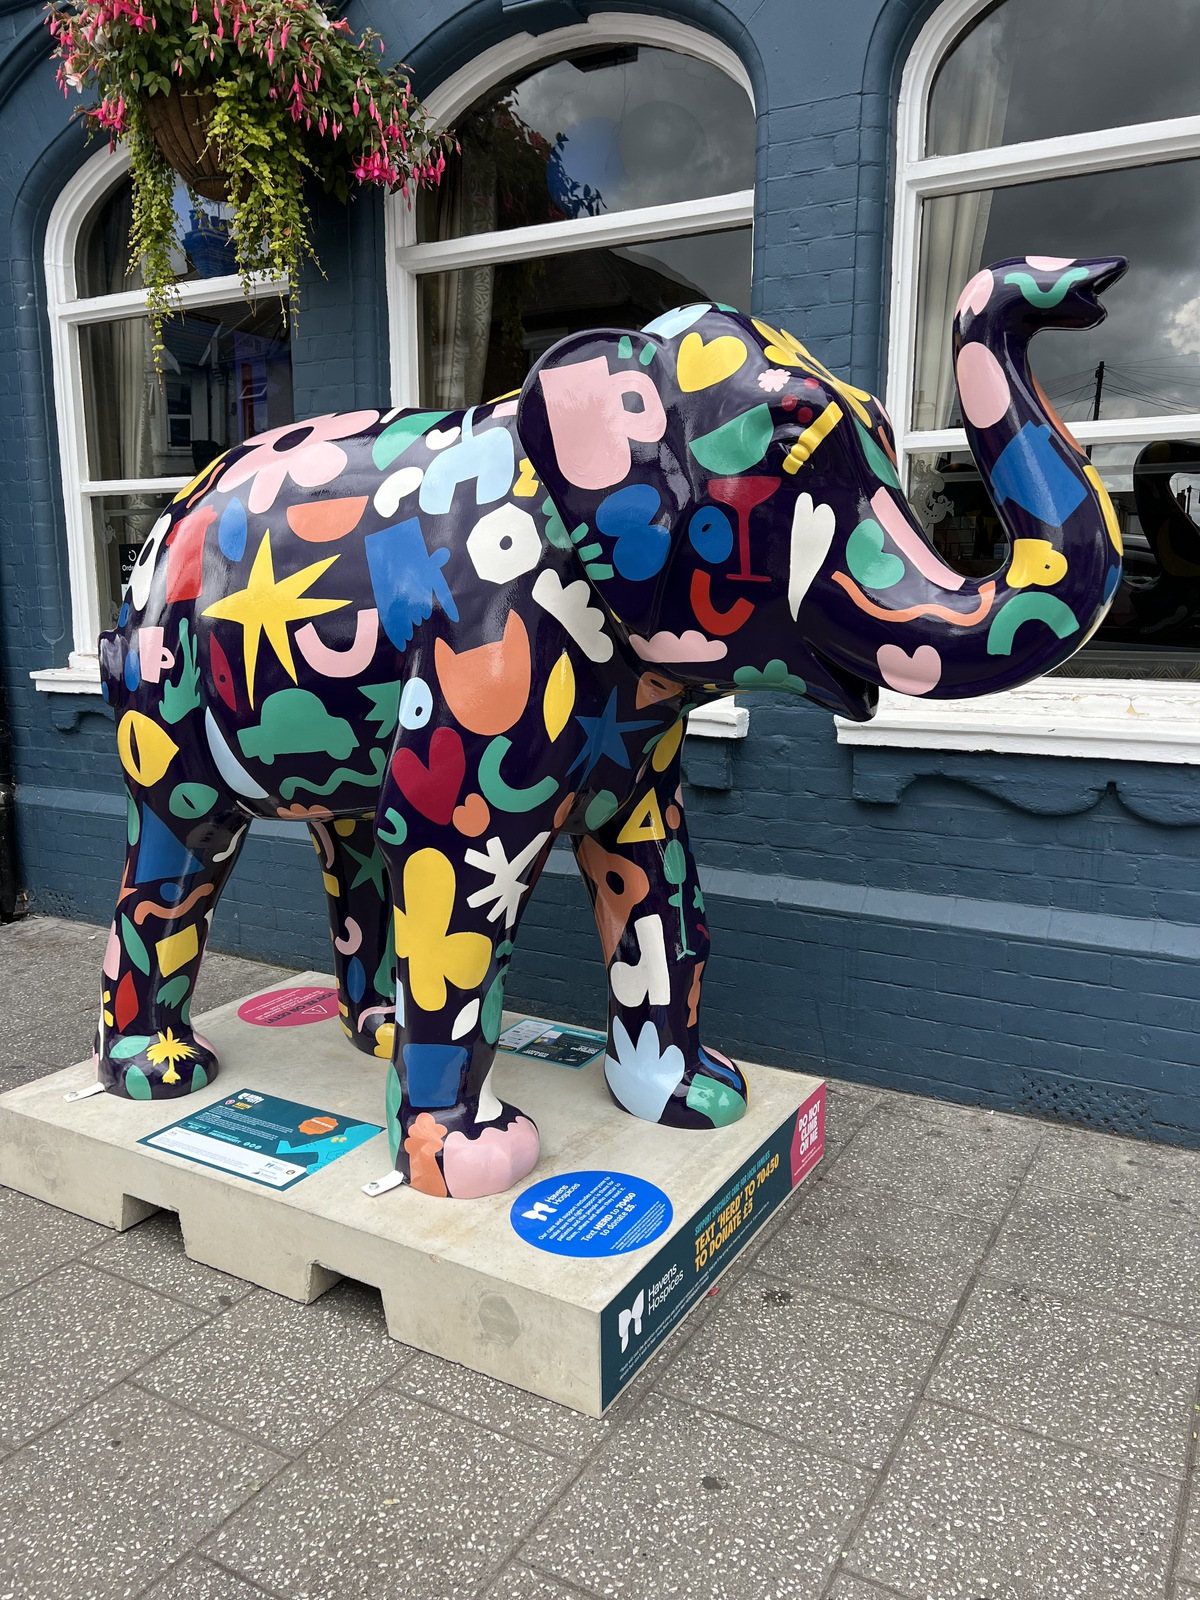 Picture of 'Keith' elephant by The Broadway pub